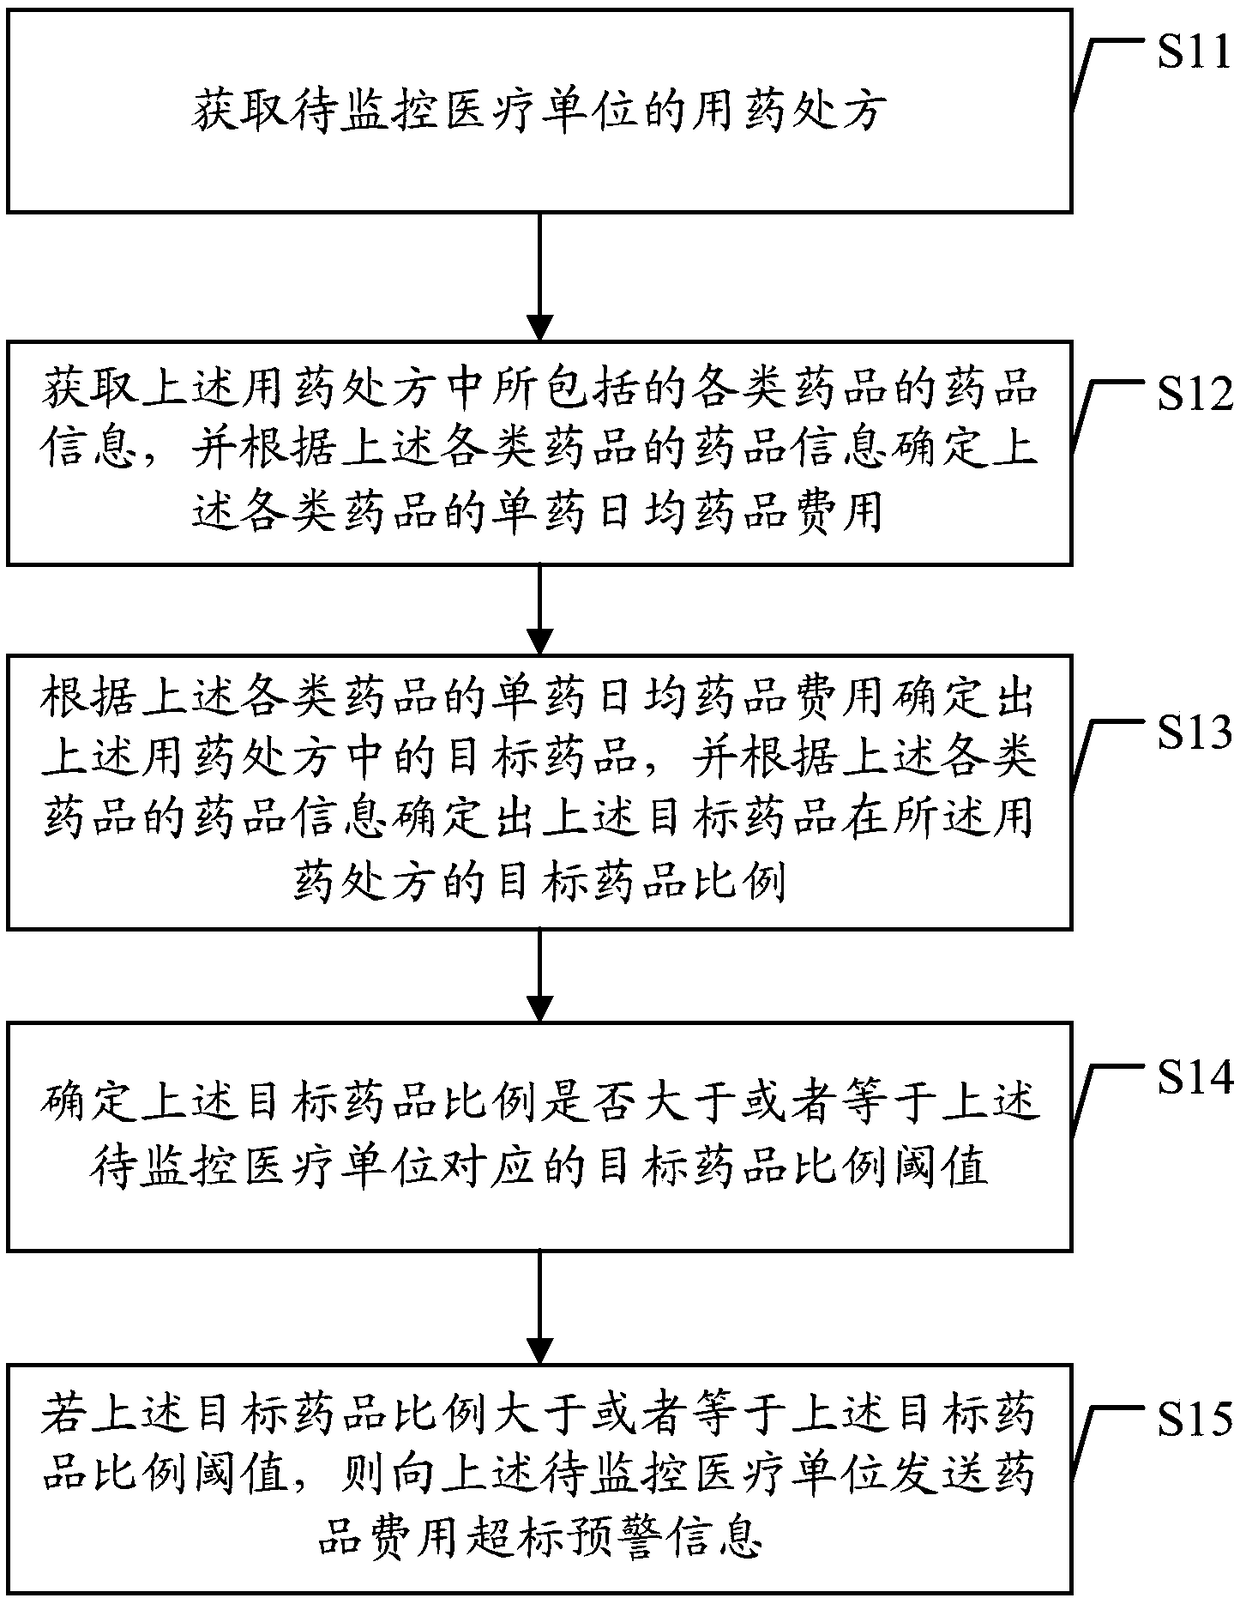 Method and device for prewarning drug cost exceeding standard based on data processing